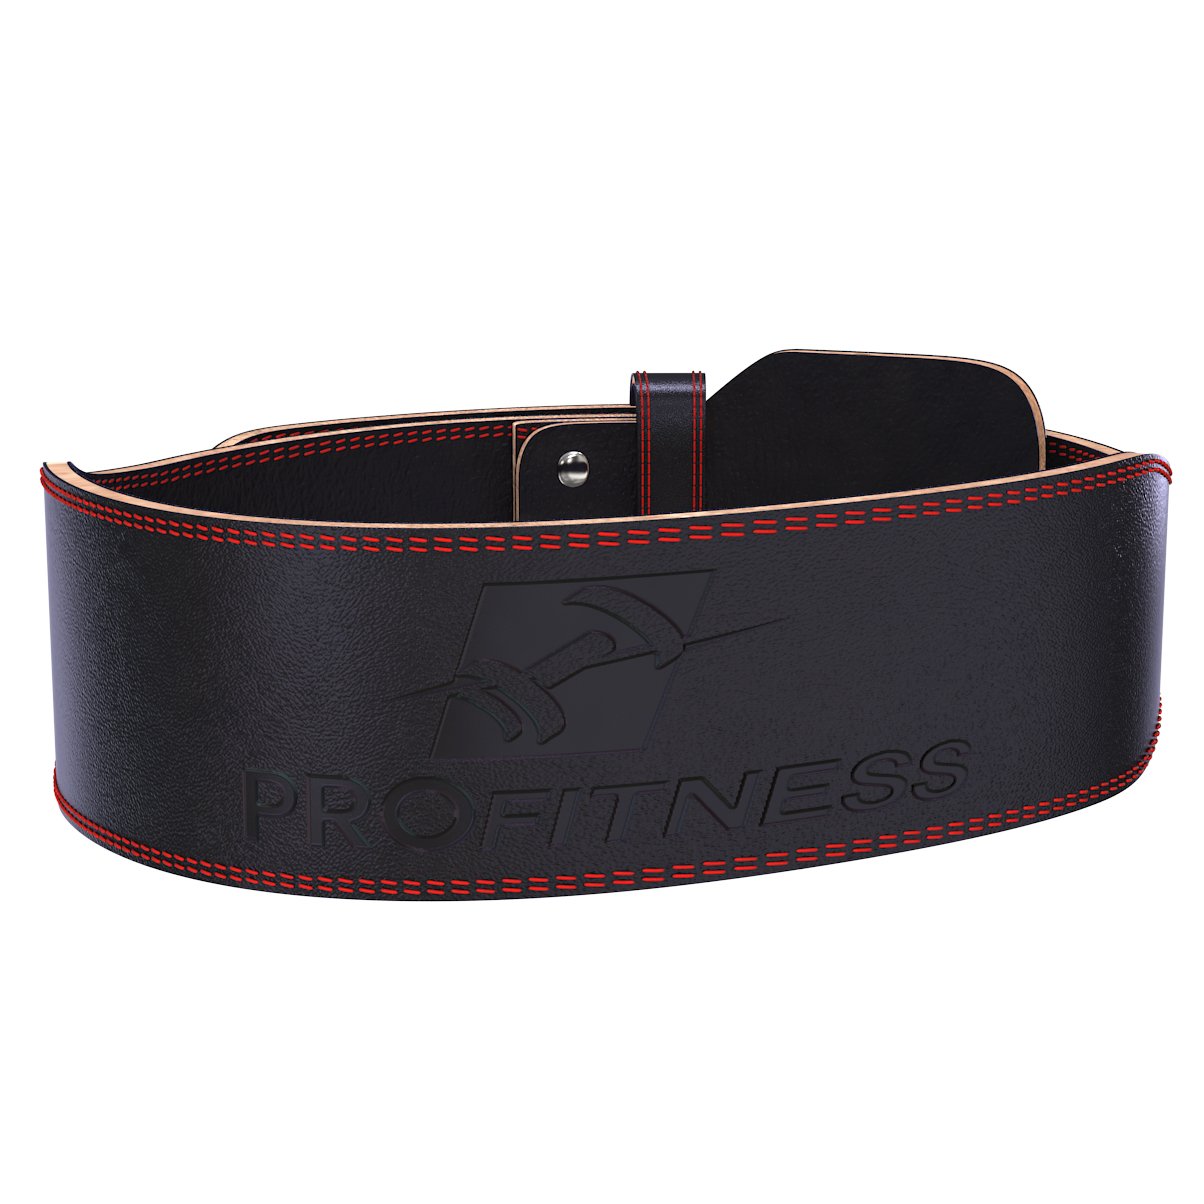 7mm Thick Tapered Lifting Belt - TotalProFitness